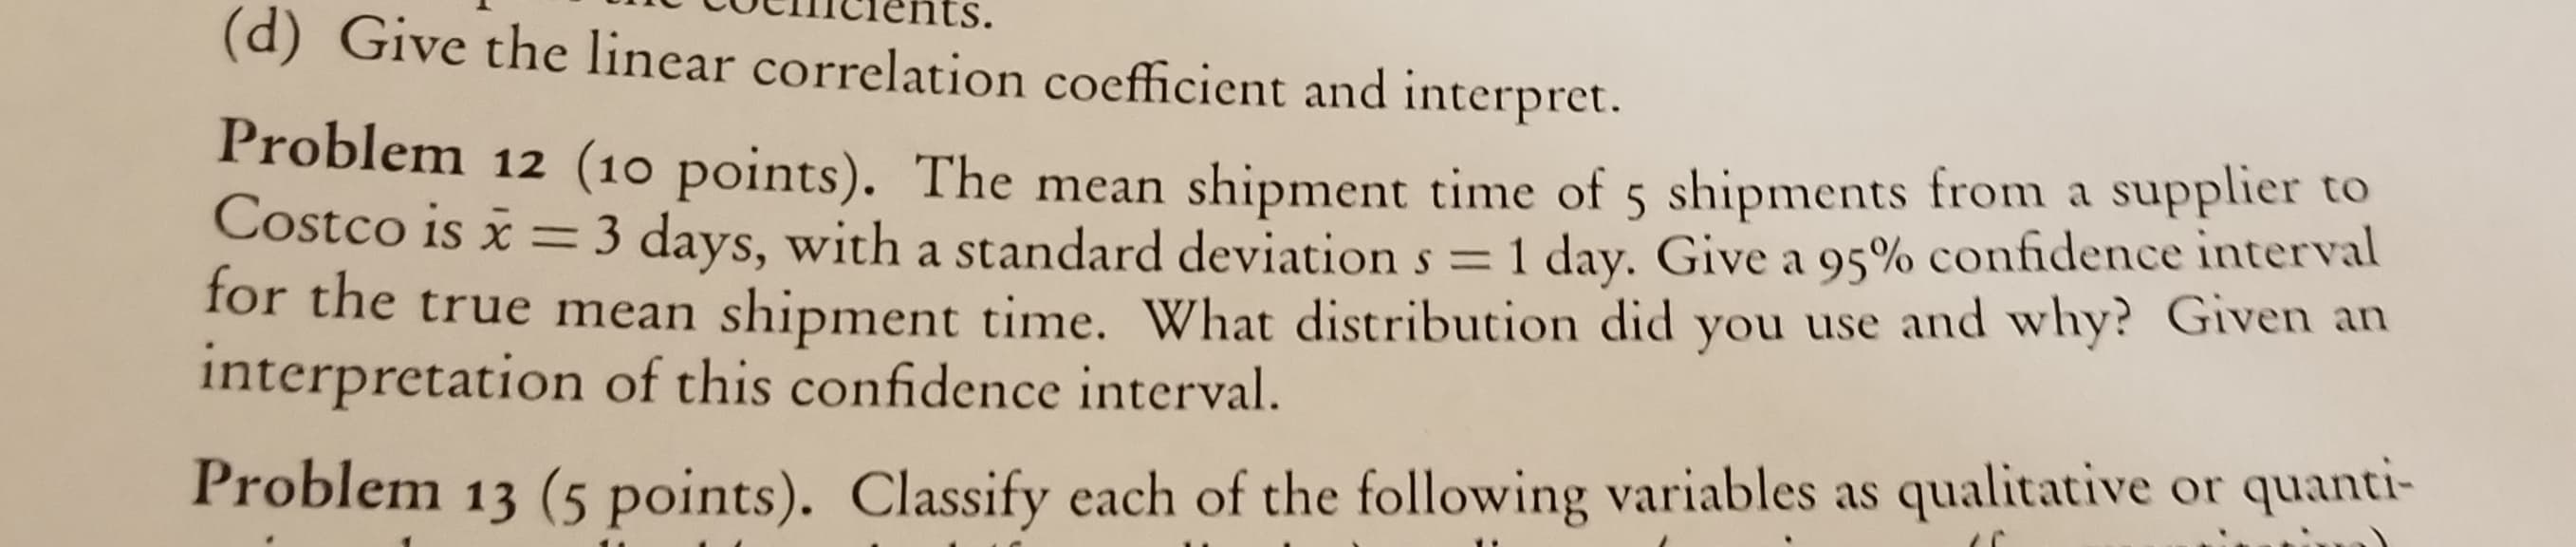 стents.
(d) Give the linear correlation coefficient and interpret.
Problem 12 (10 points). The mean shipment time of 5 shipments from a supplier to
Costco is x =3 days, with a standard deviation s = 1 day. Give a 95% confidence interval
for the true mean shipment time. What distribution did you use and why? Given an
interpretation of this confidence interval.
Problem 13 (5 points). Classify each of the following variables as qualitative or quanti-
